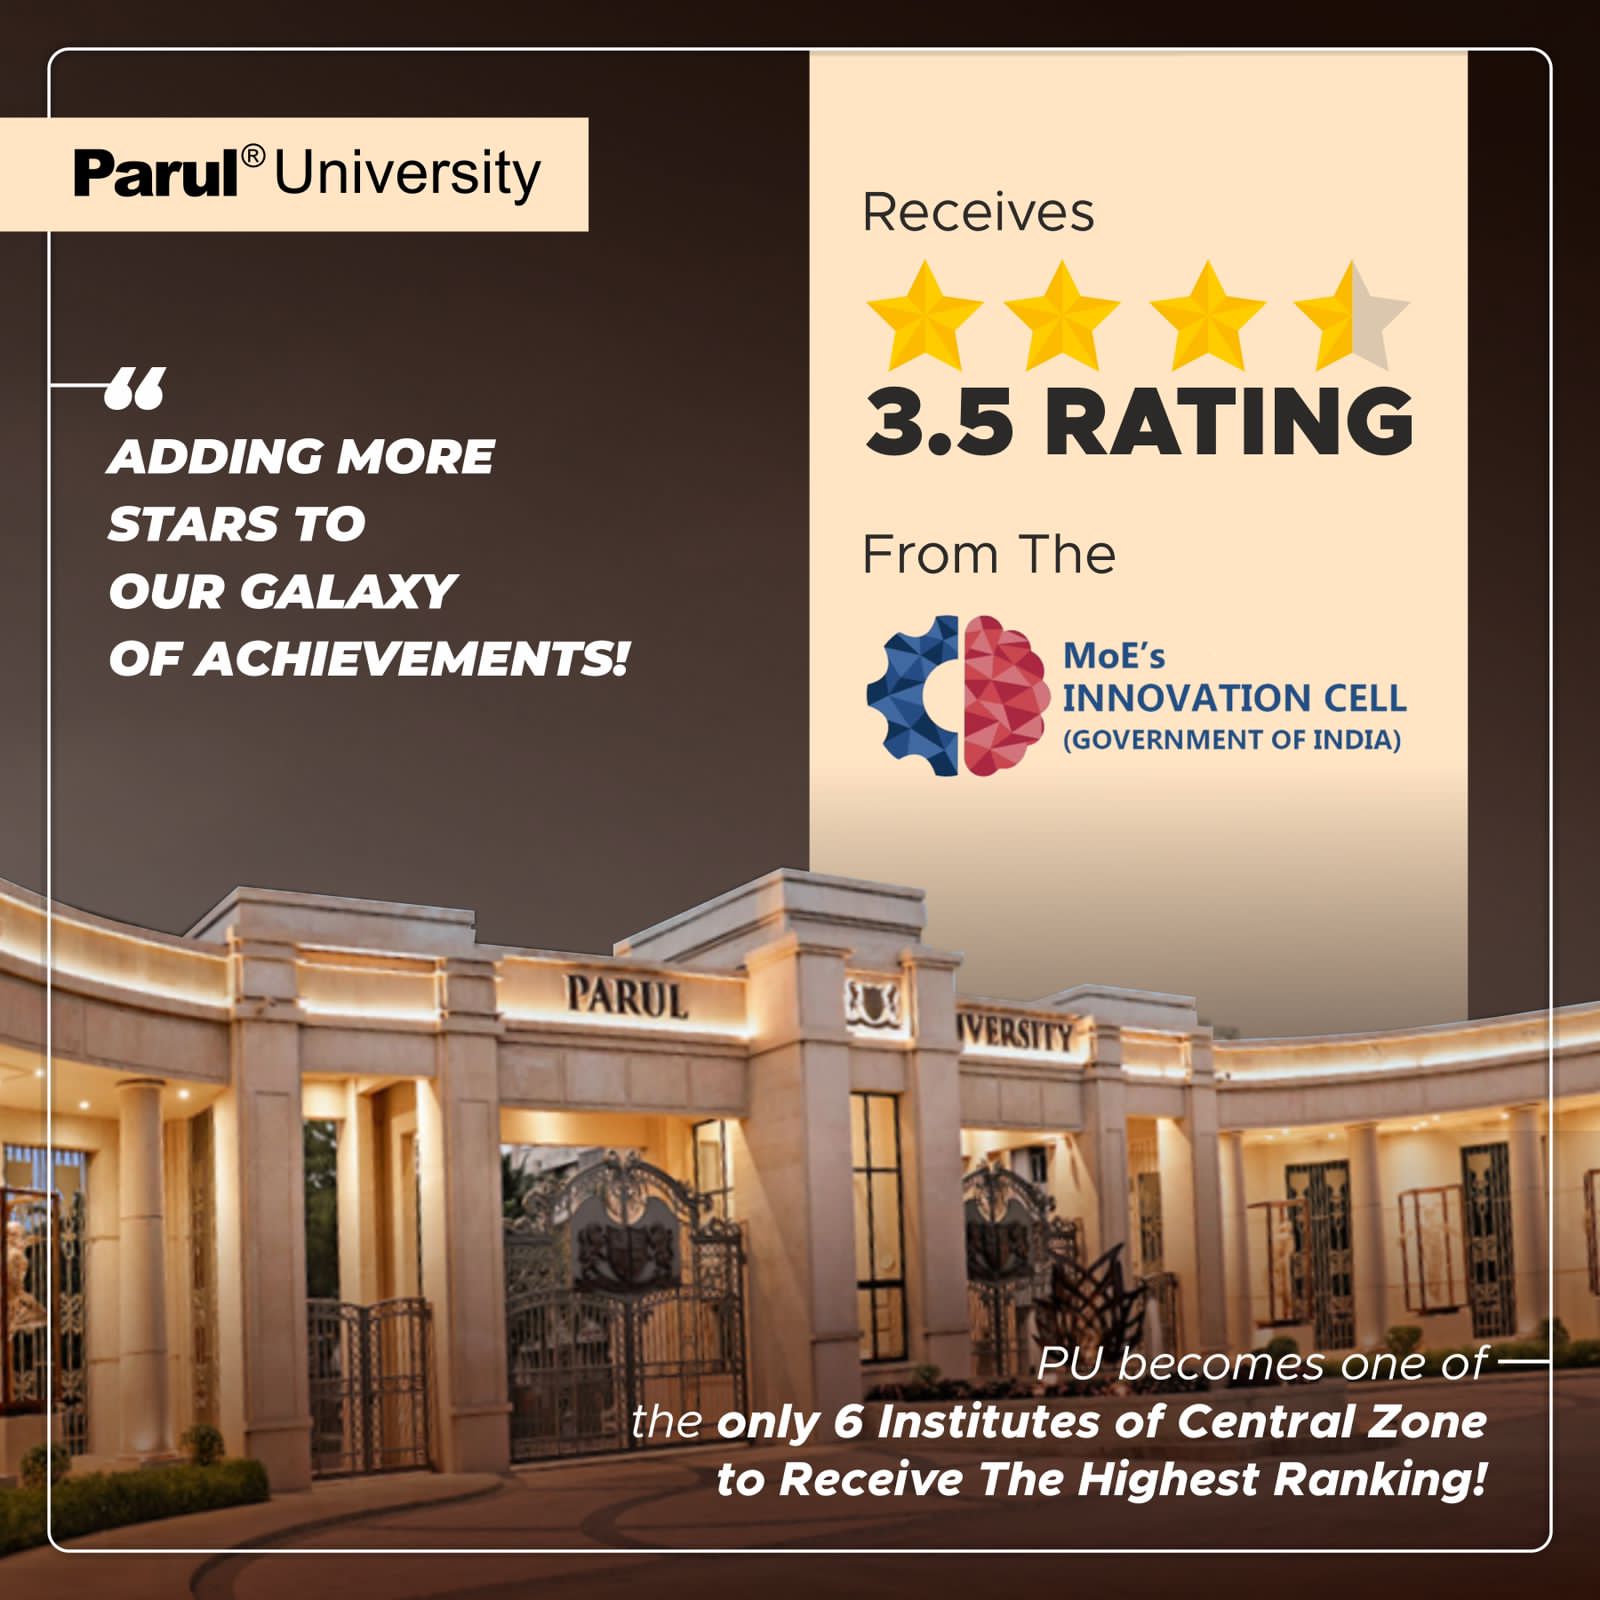 PU cultivates a spirit of innovation in the Central Zone by receiving a 3.5 star rating by IIC